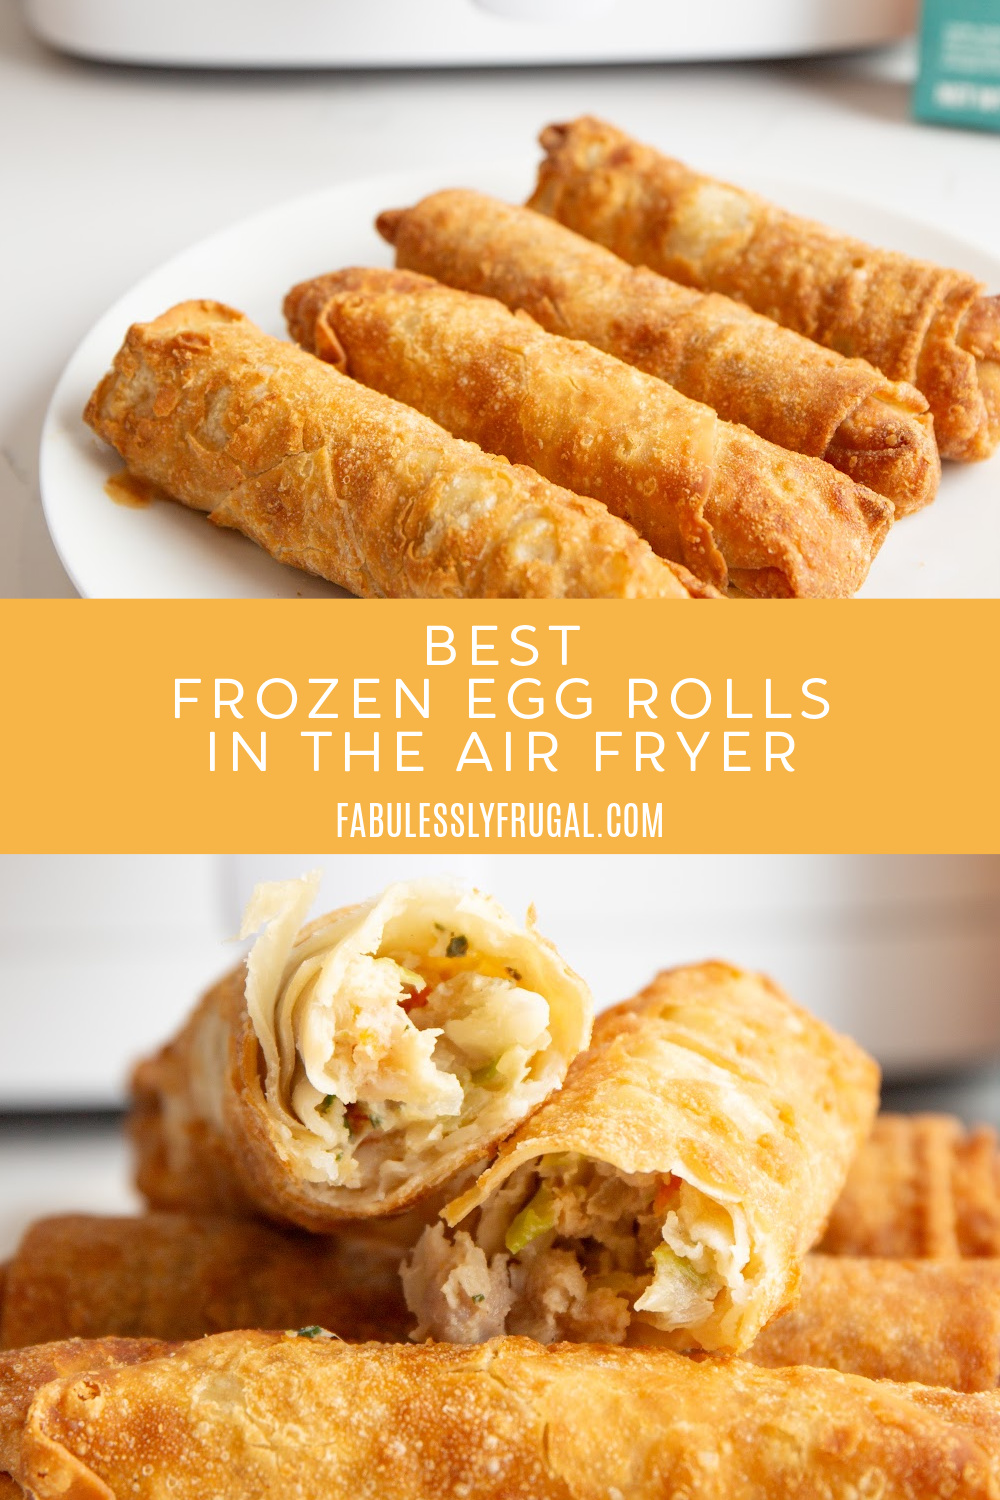 https://fabulesslyfrugal.com/wp-content/uploads/2023/08/how-to-make-egg-rolls-in-the-air-fryer-2.jpg